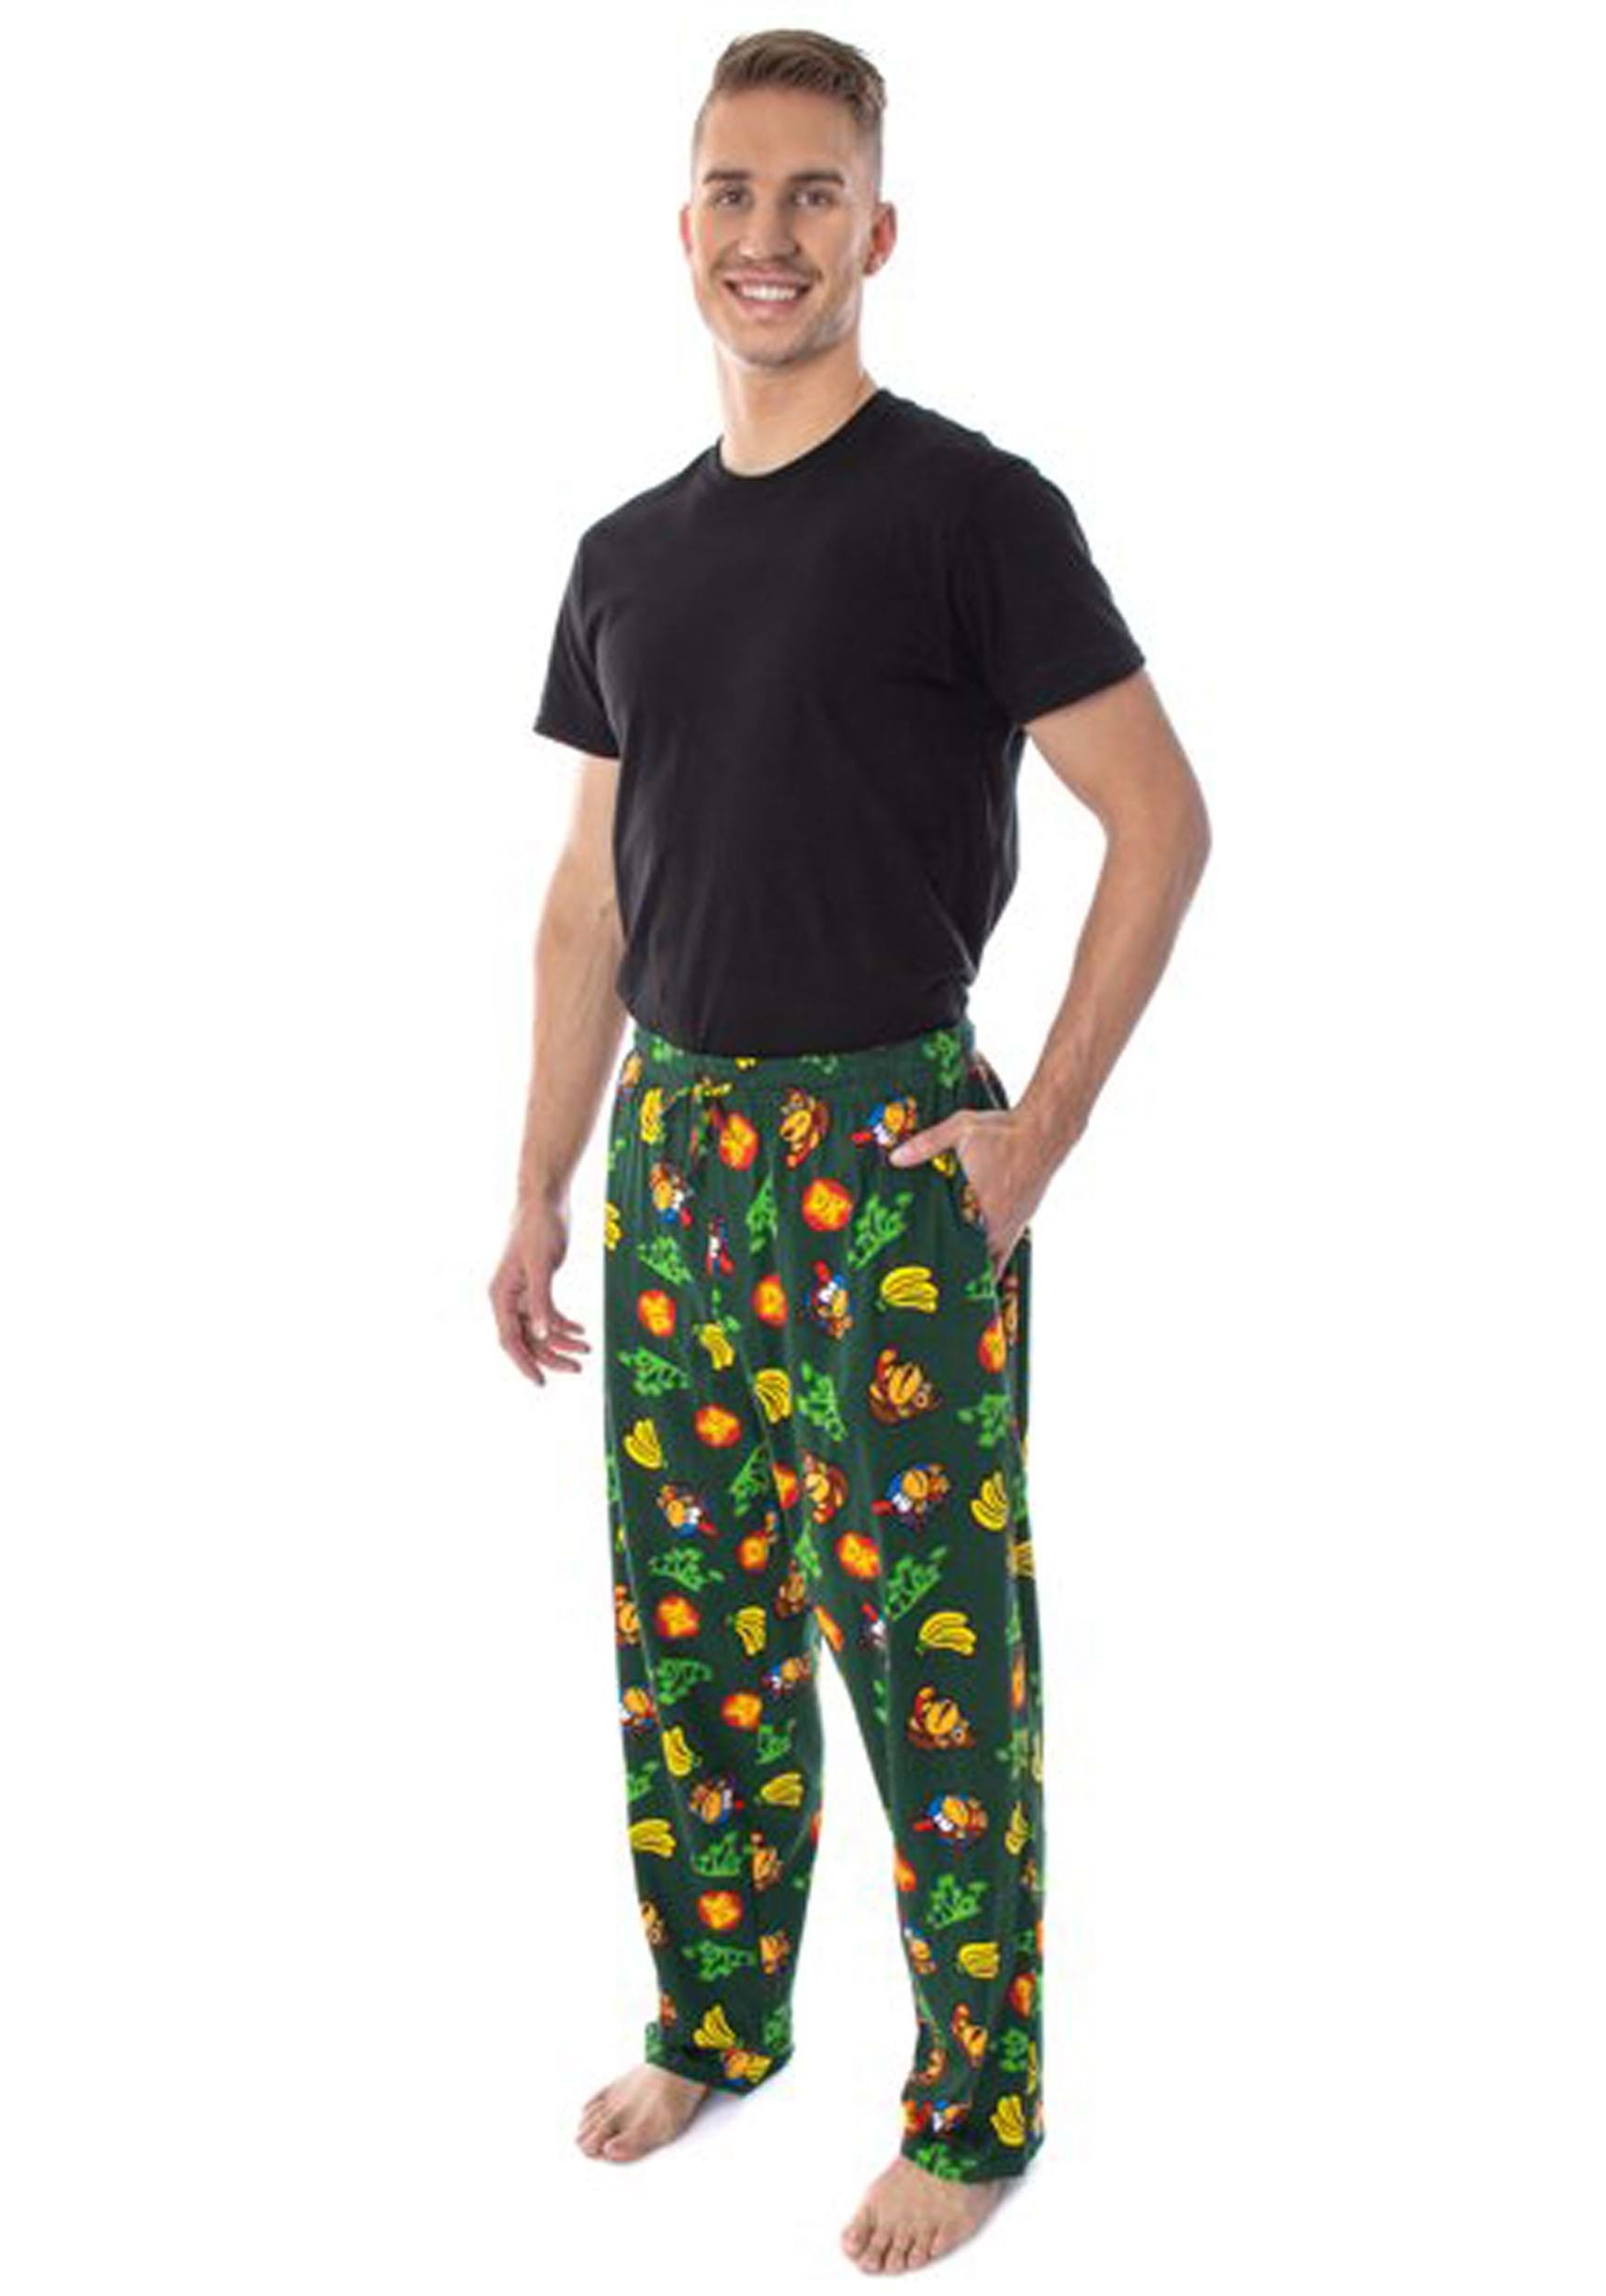 Donkey Kong & DIddy Tropical Sleep Pants for Men